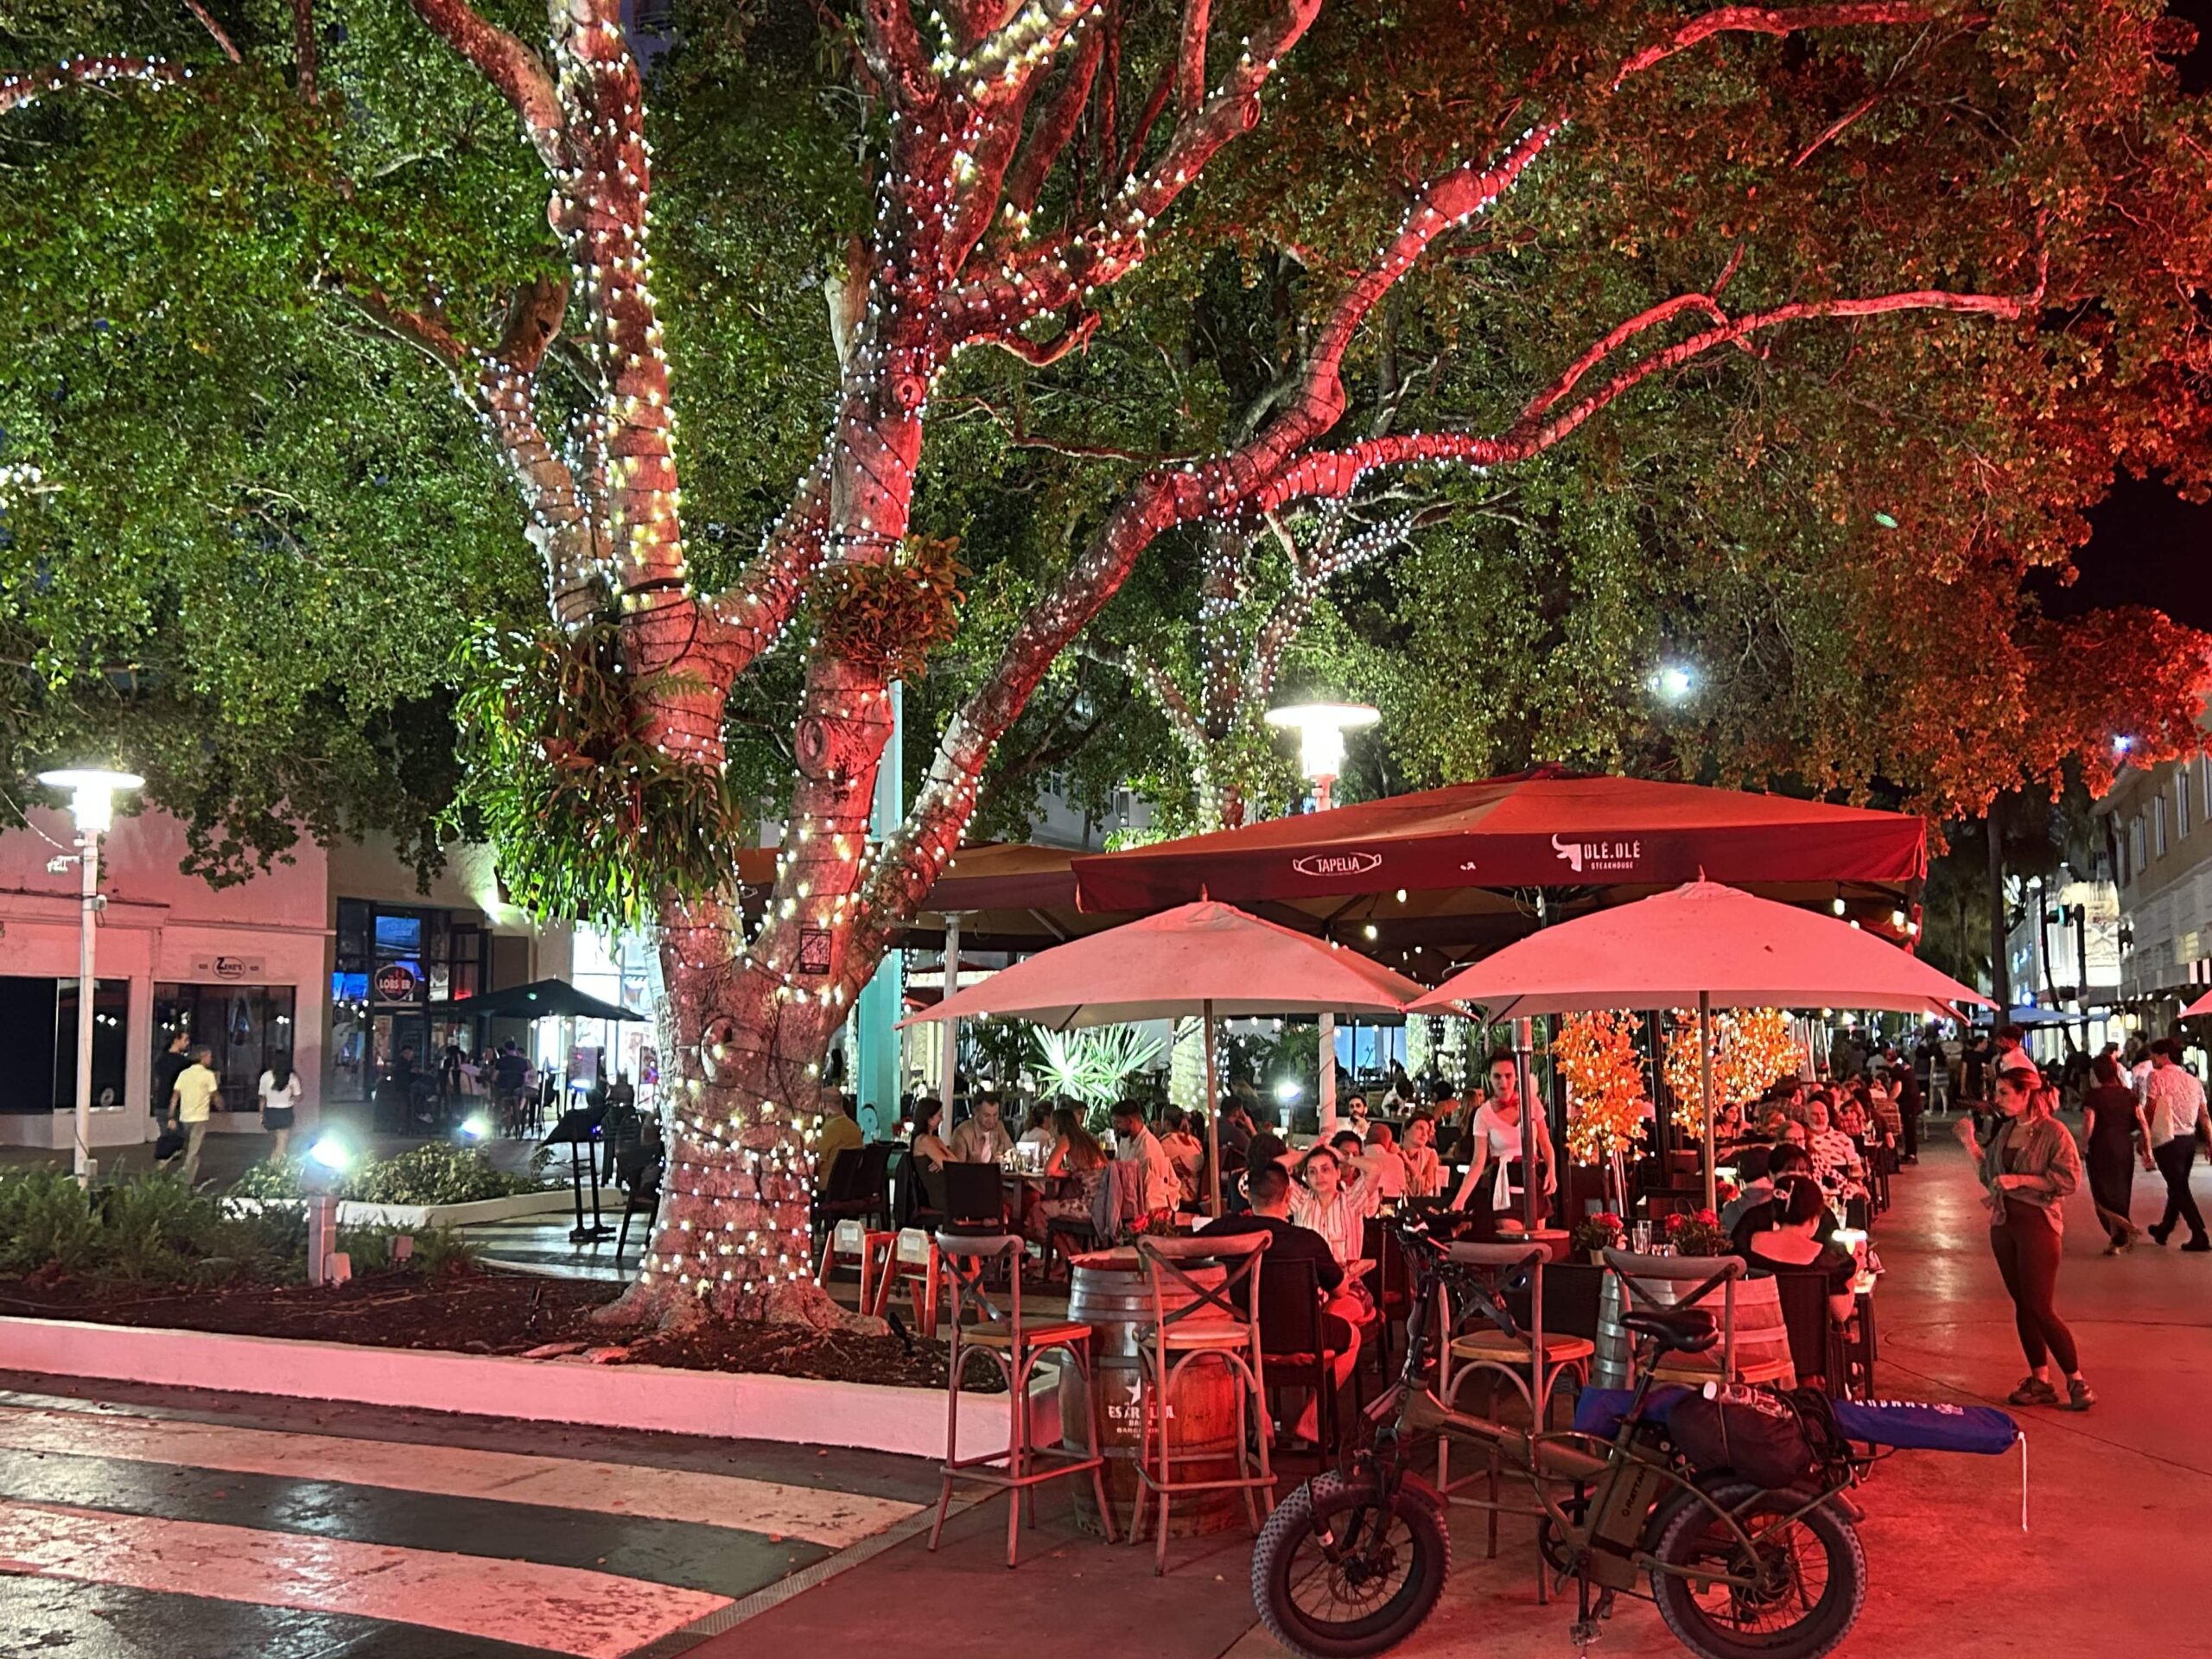 Nightlife on Lincoln Road